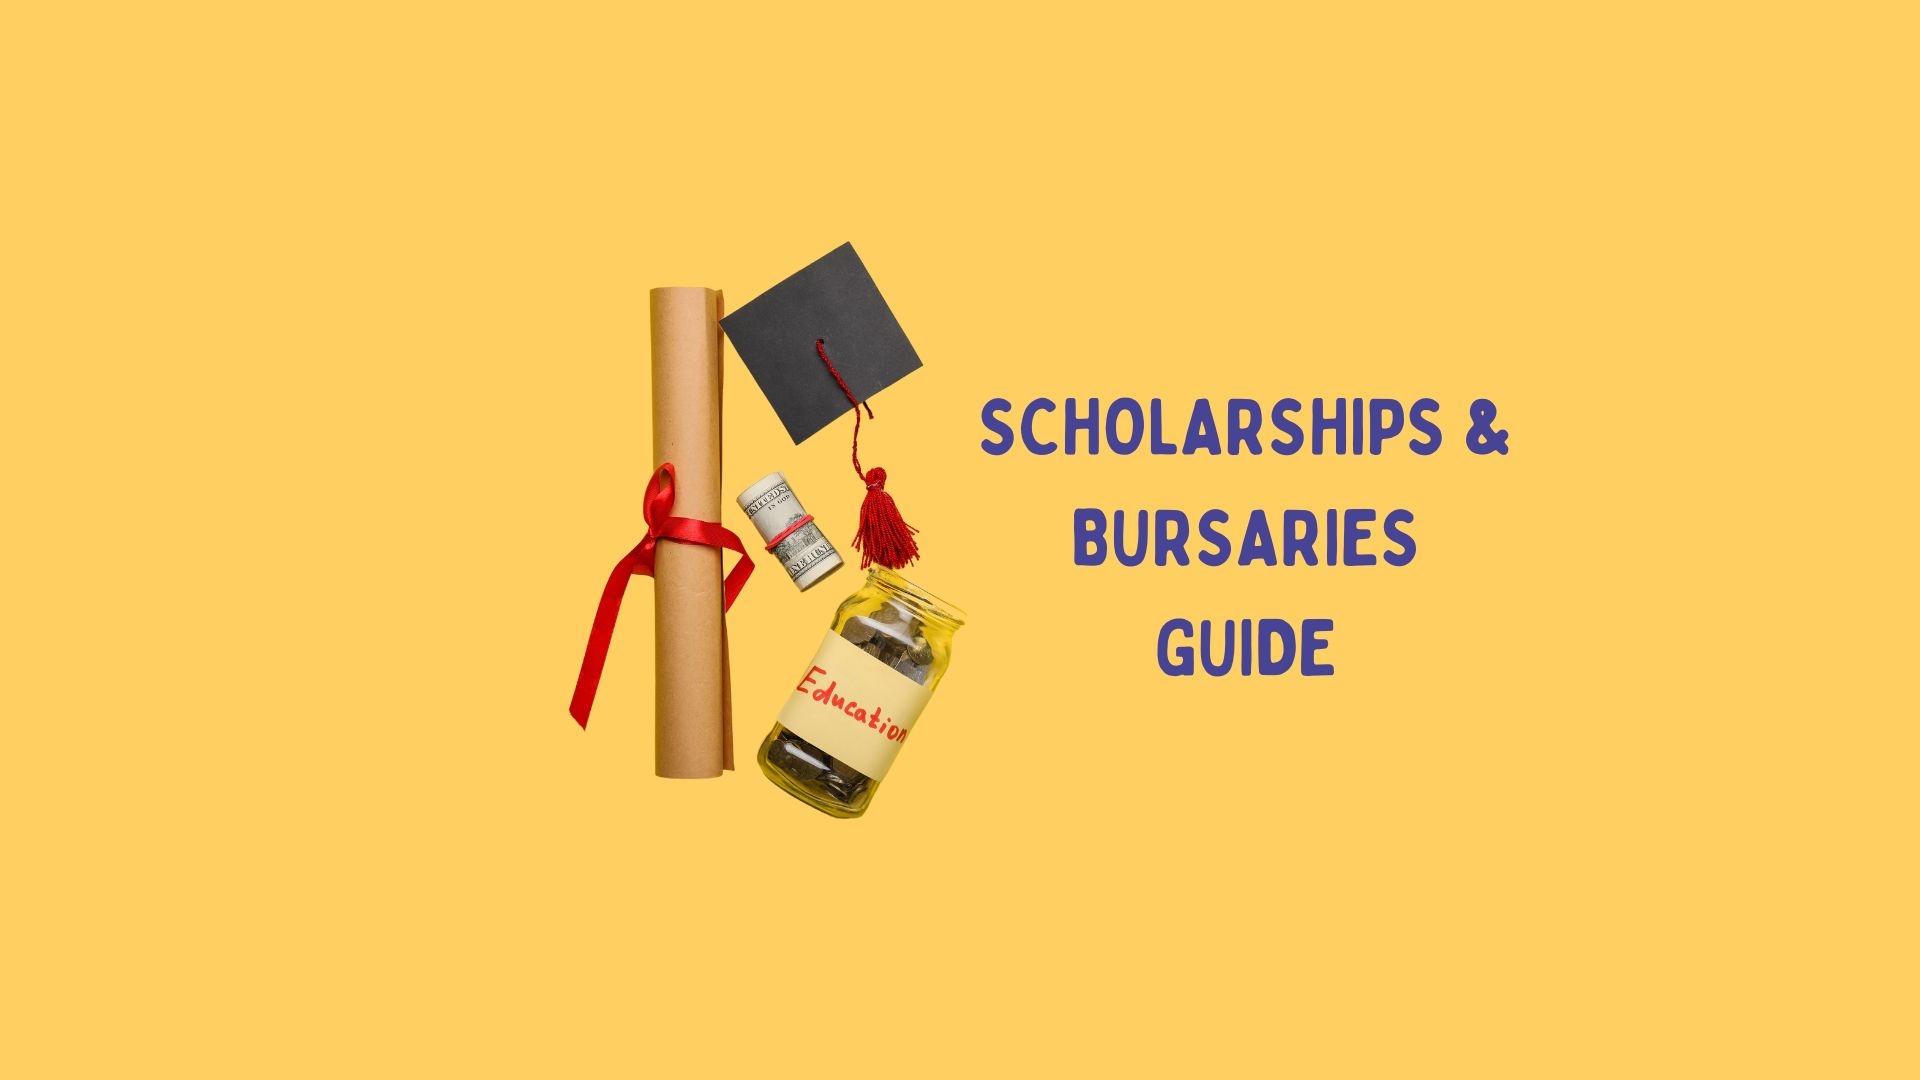 There are many forms of financial support that LSE and externalsponsors provide, for which you may be eligible. These options range from international students' scholarships to bursaries for home students. Read our guide to find out what support you can access!